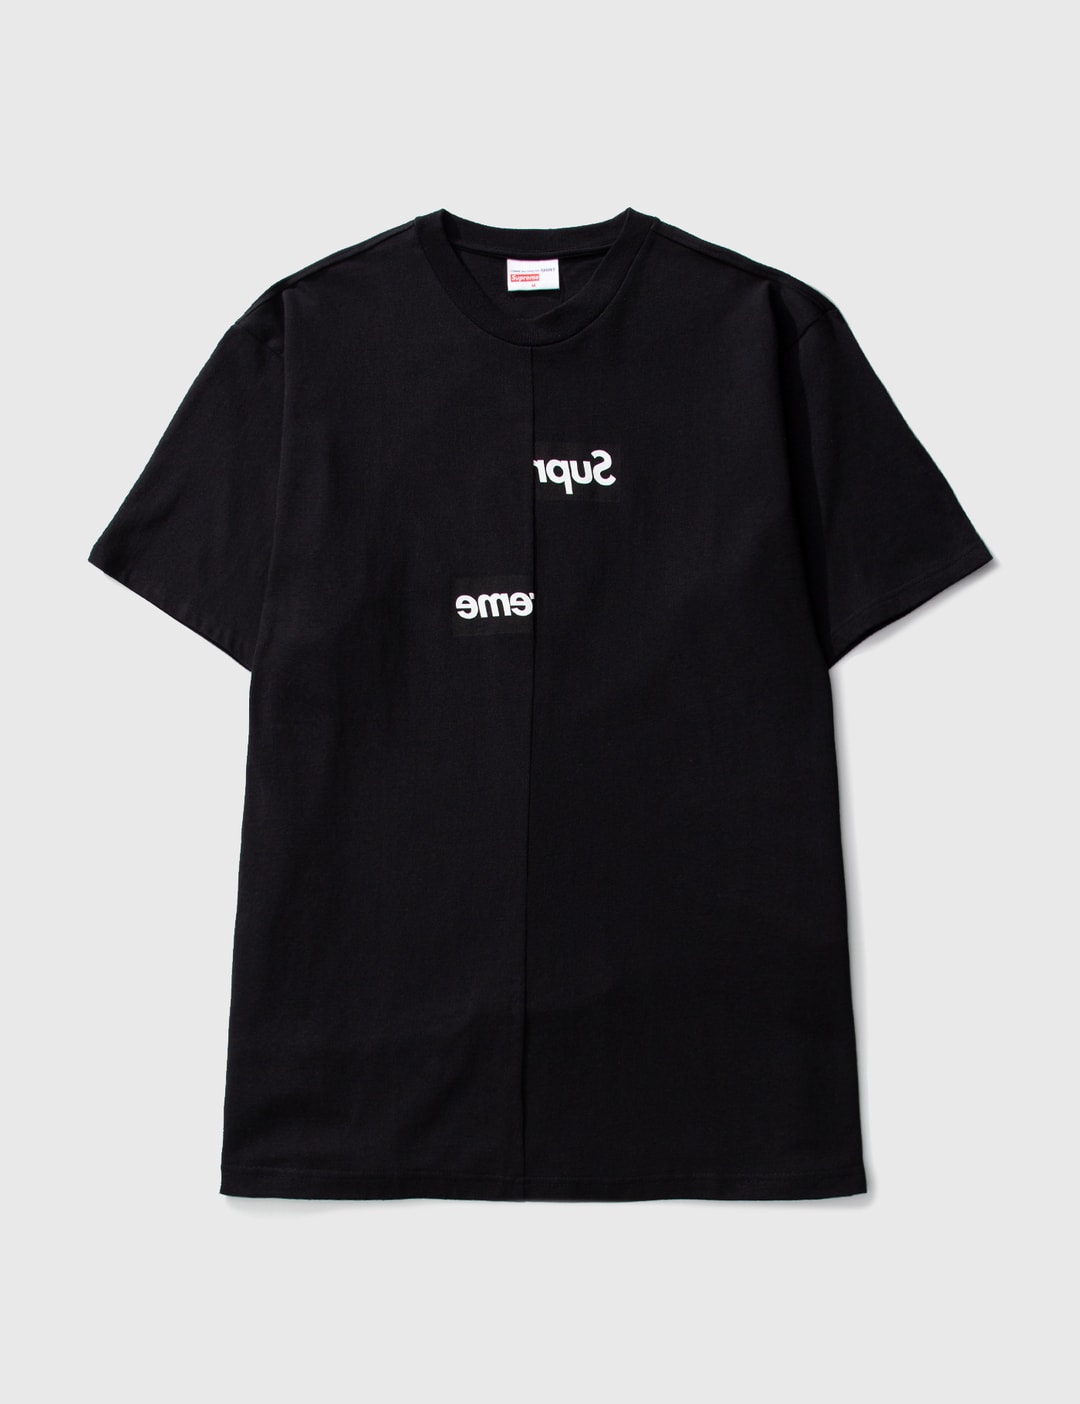 Comme Shirt X Supreme Ss T-shirt | HBX - Globally Curated Fashion and Lifestyle by Hypebeast